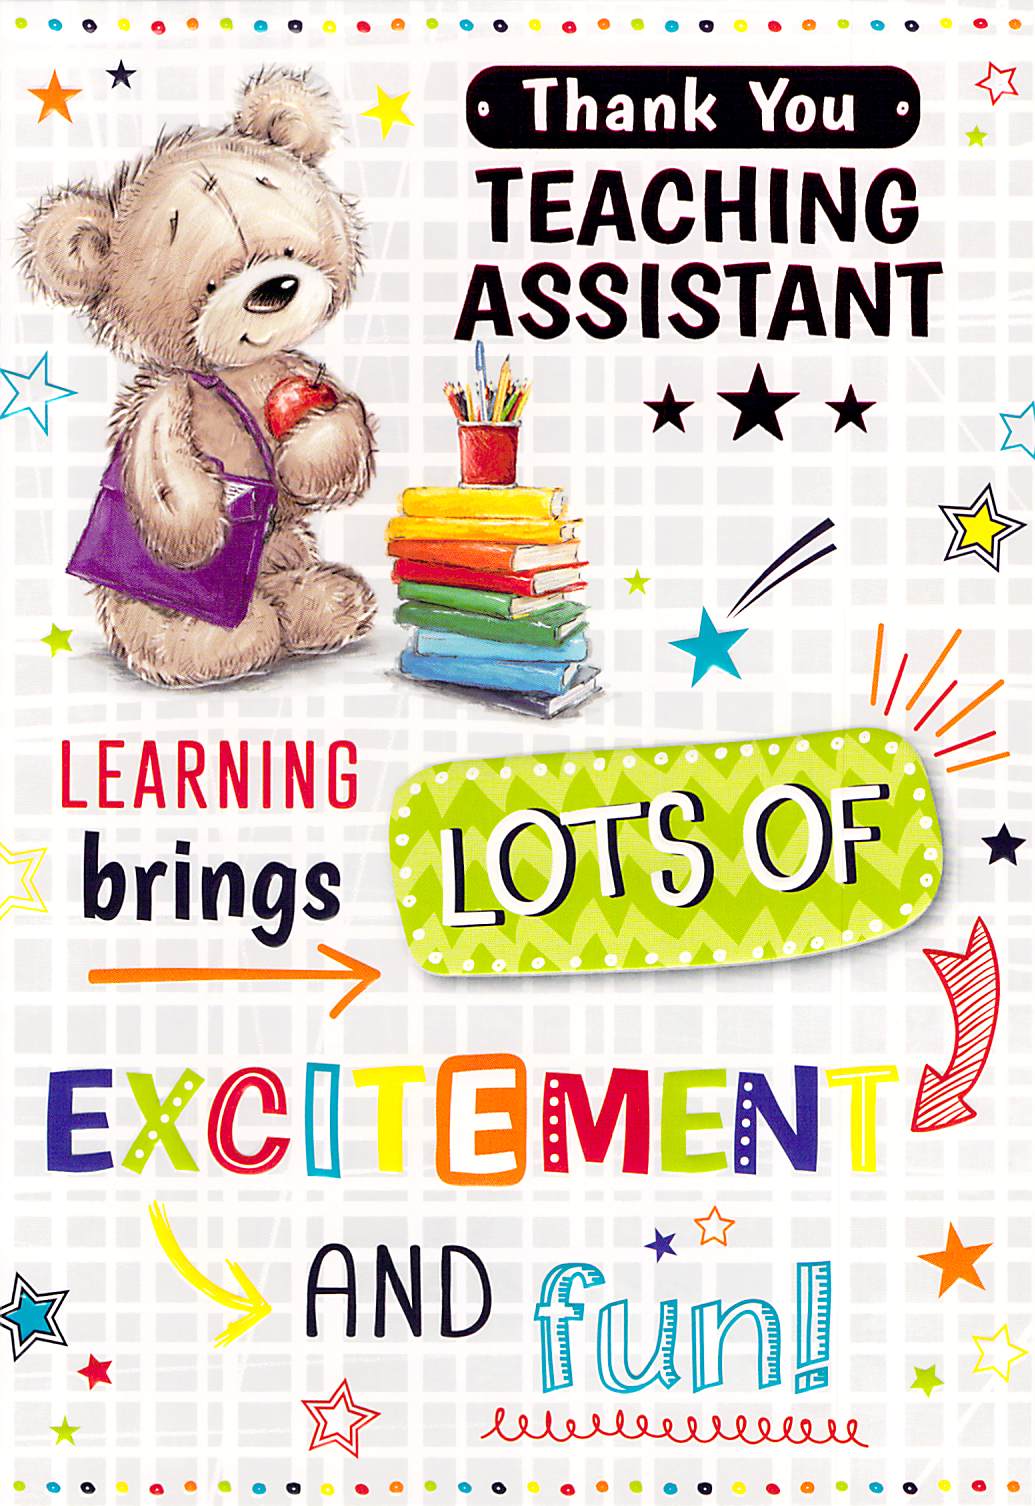 Thank You Teaching Assistant - Greeting Card - Free Postage